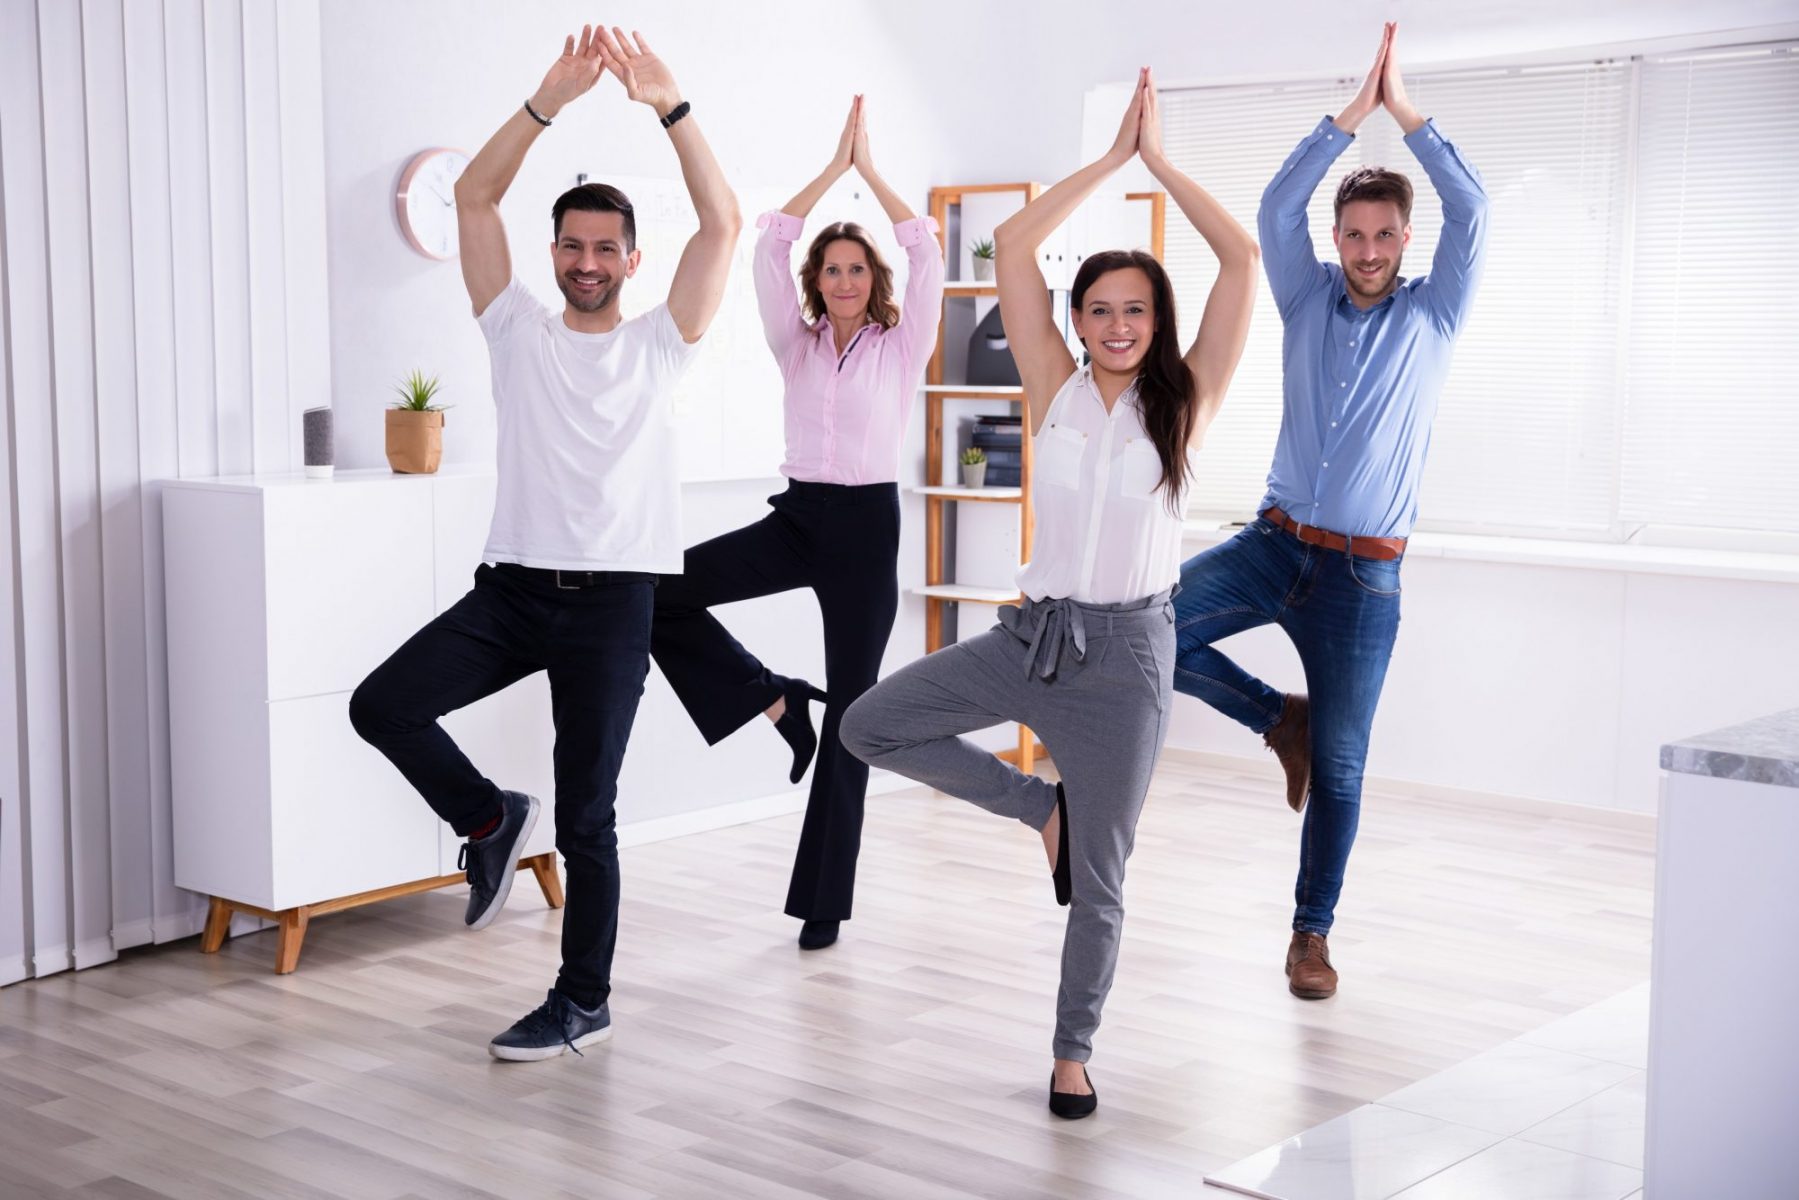 Augusta Company Culture | Healthy Options | Health and Wellness | Employee Satisfaction